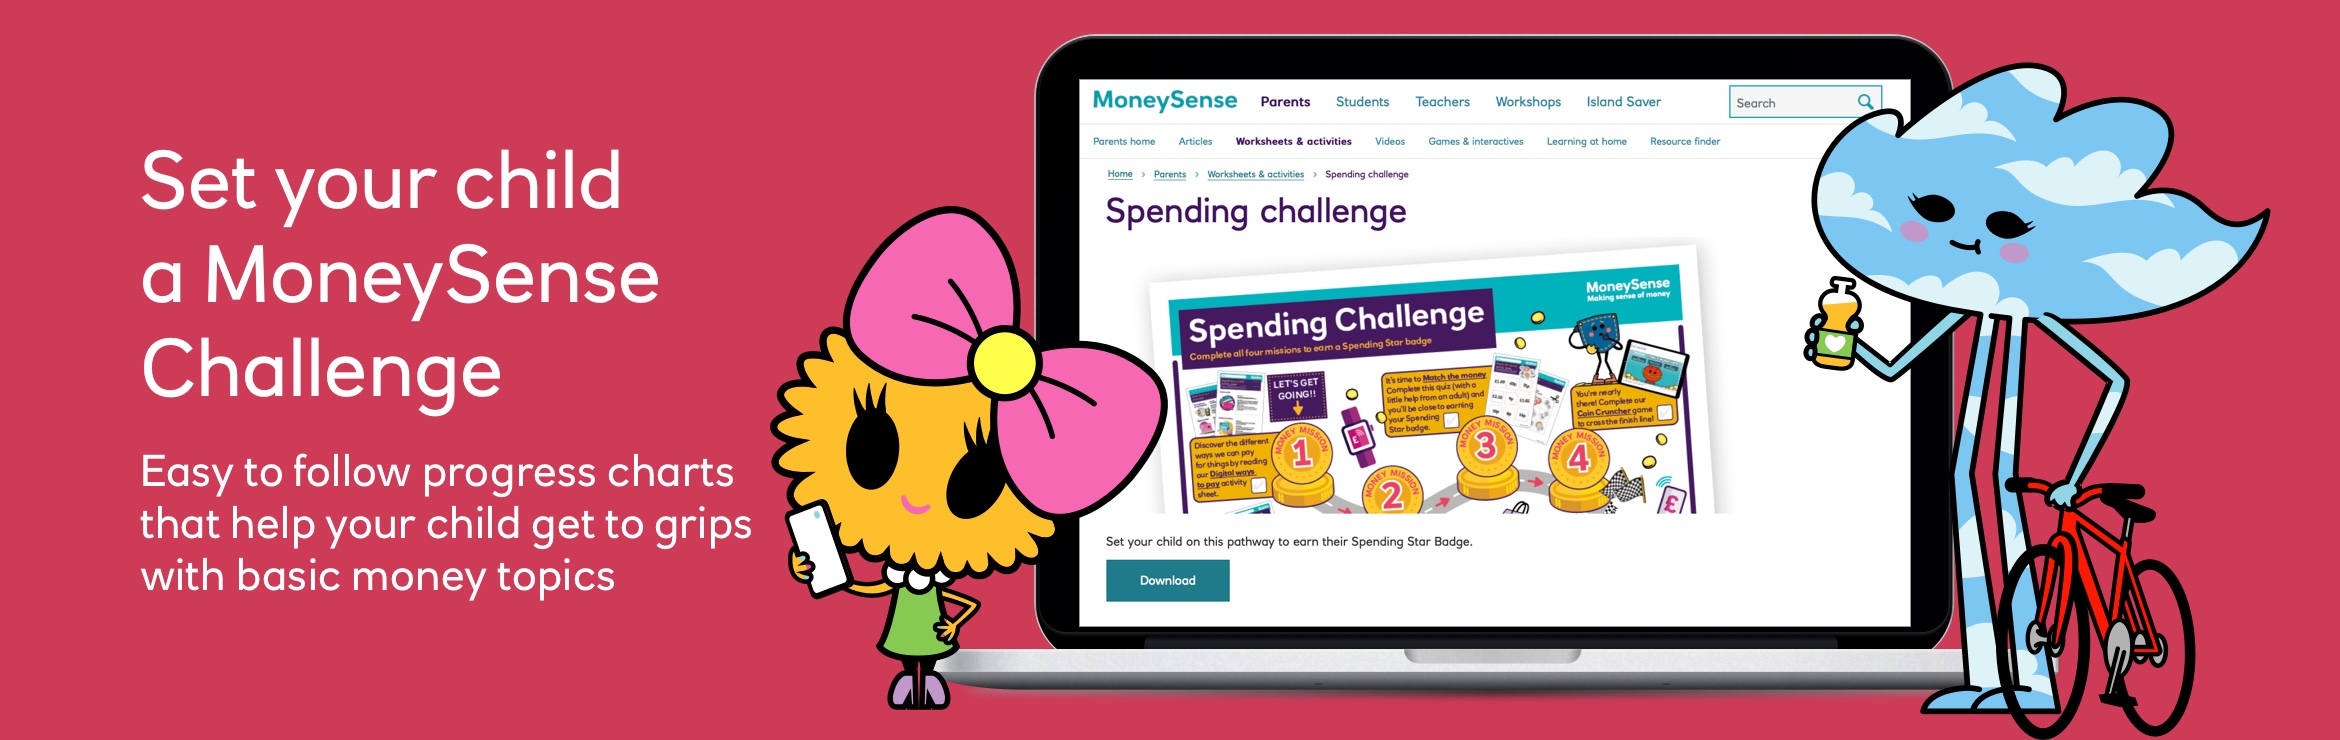 Spending challenge, a MoneySense resource for children and parens